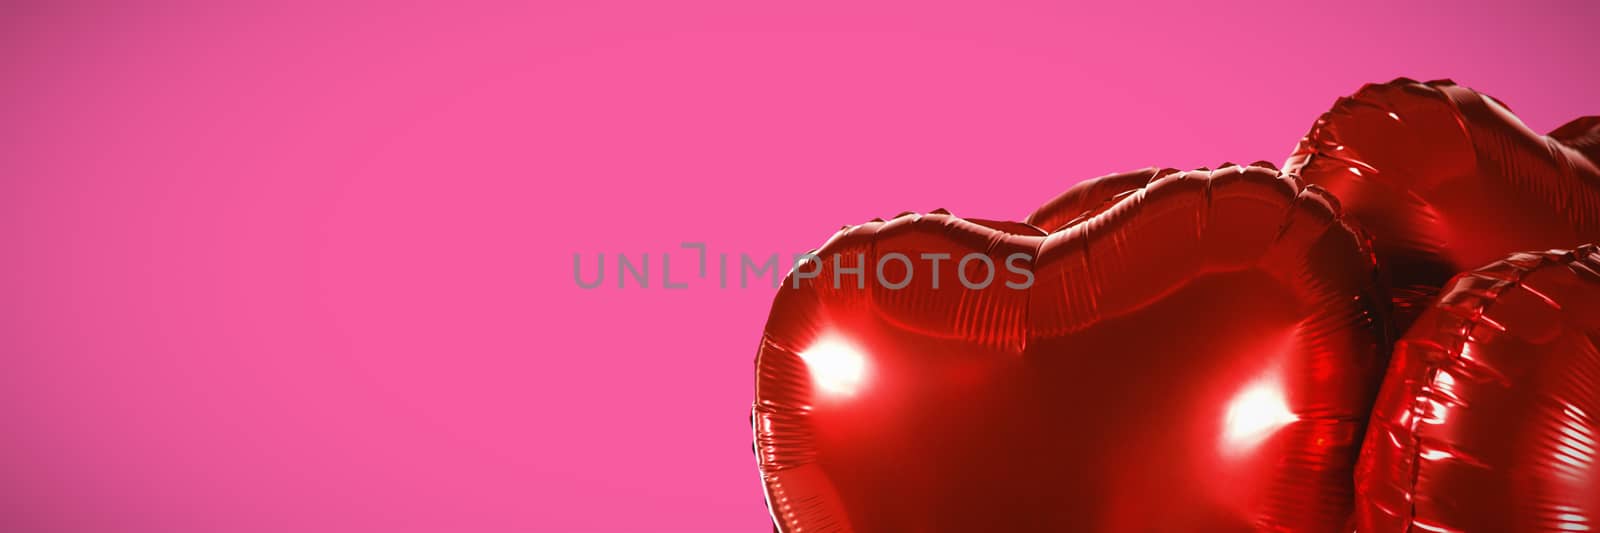 Red heart shape balloons against pink background